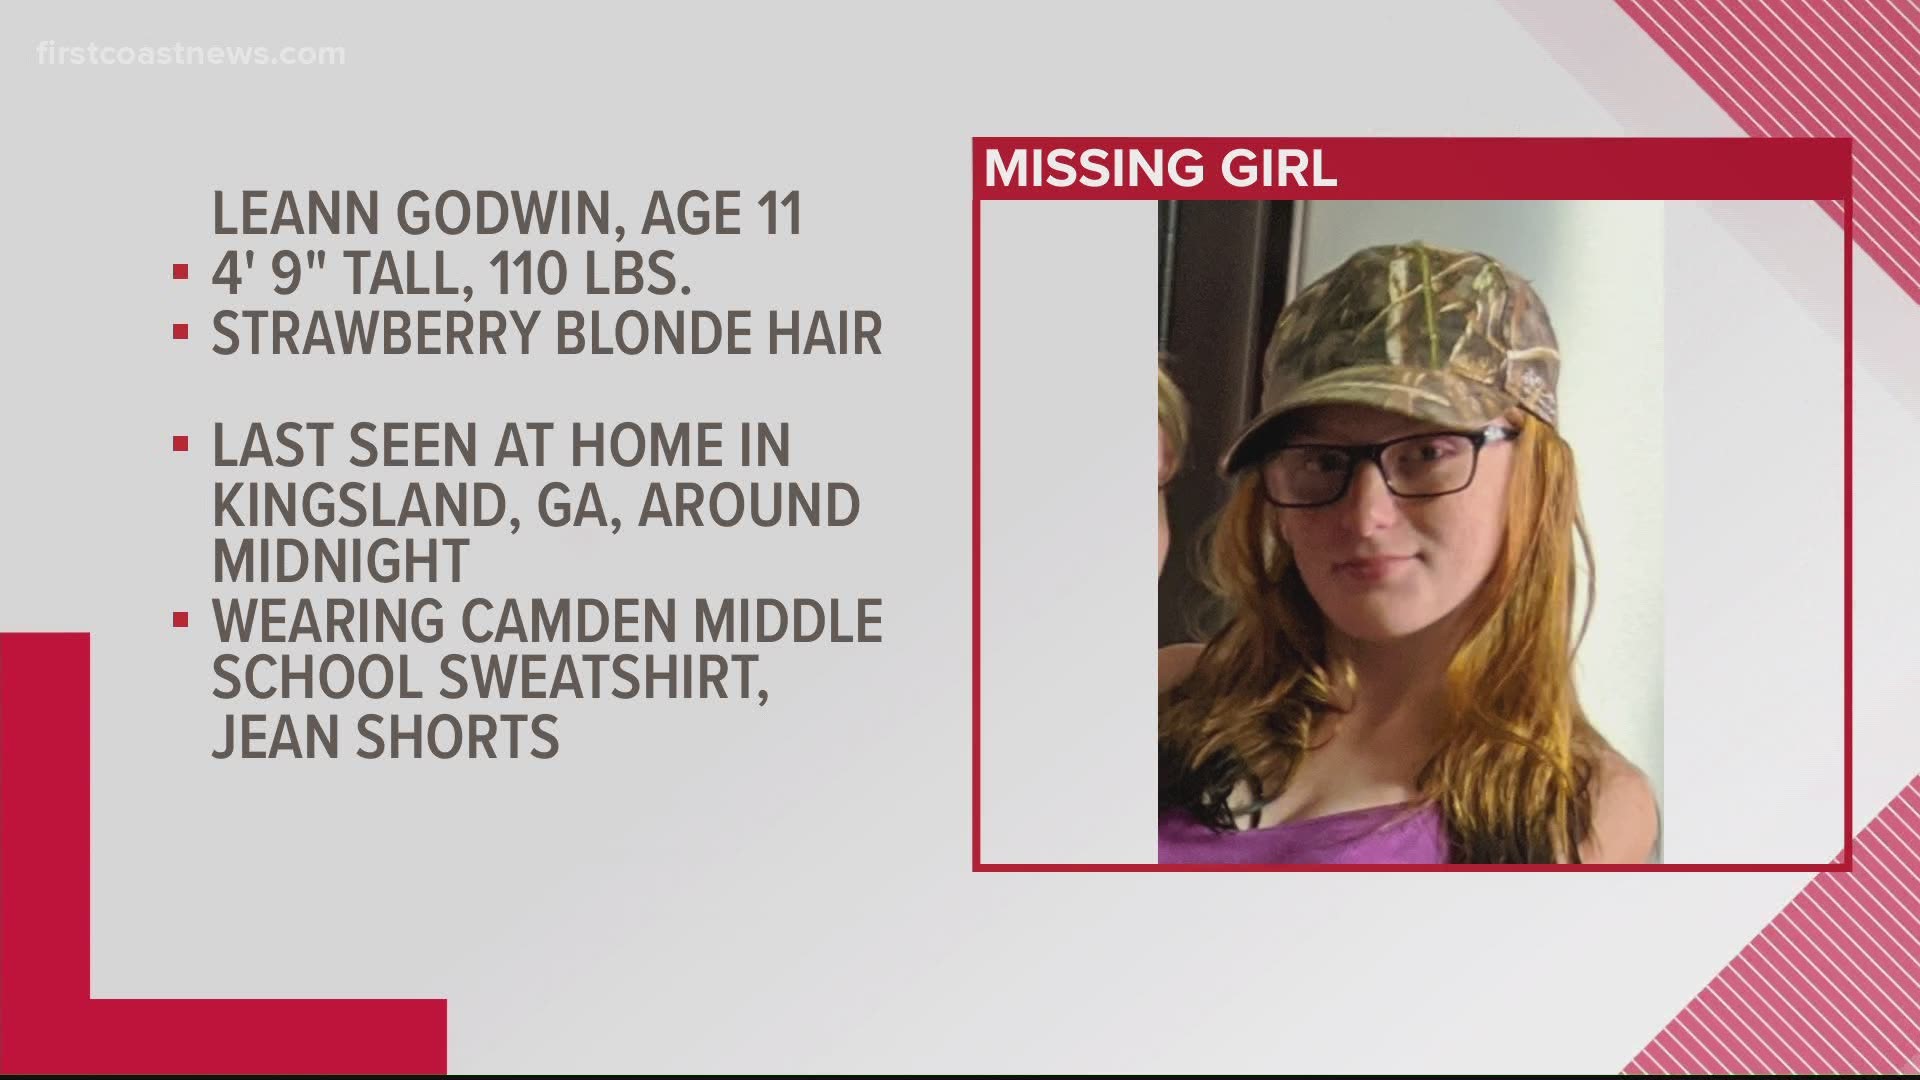 Leann Godwin is 4 feet 9 inches tall and weighs 110 pounds. She has strawberry blonde hair and was last seen wearing a Camden Middle School sweatshirt and jeans.